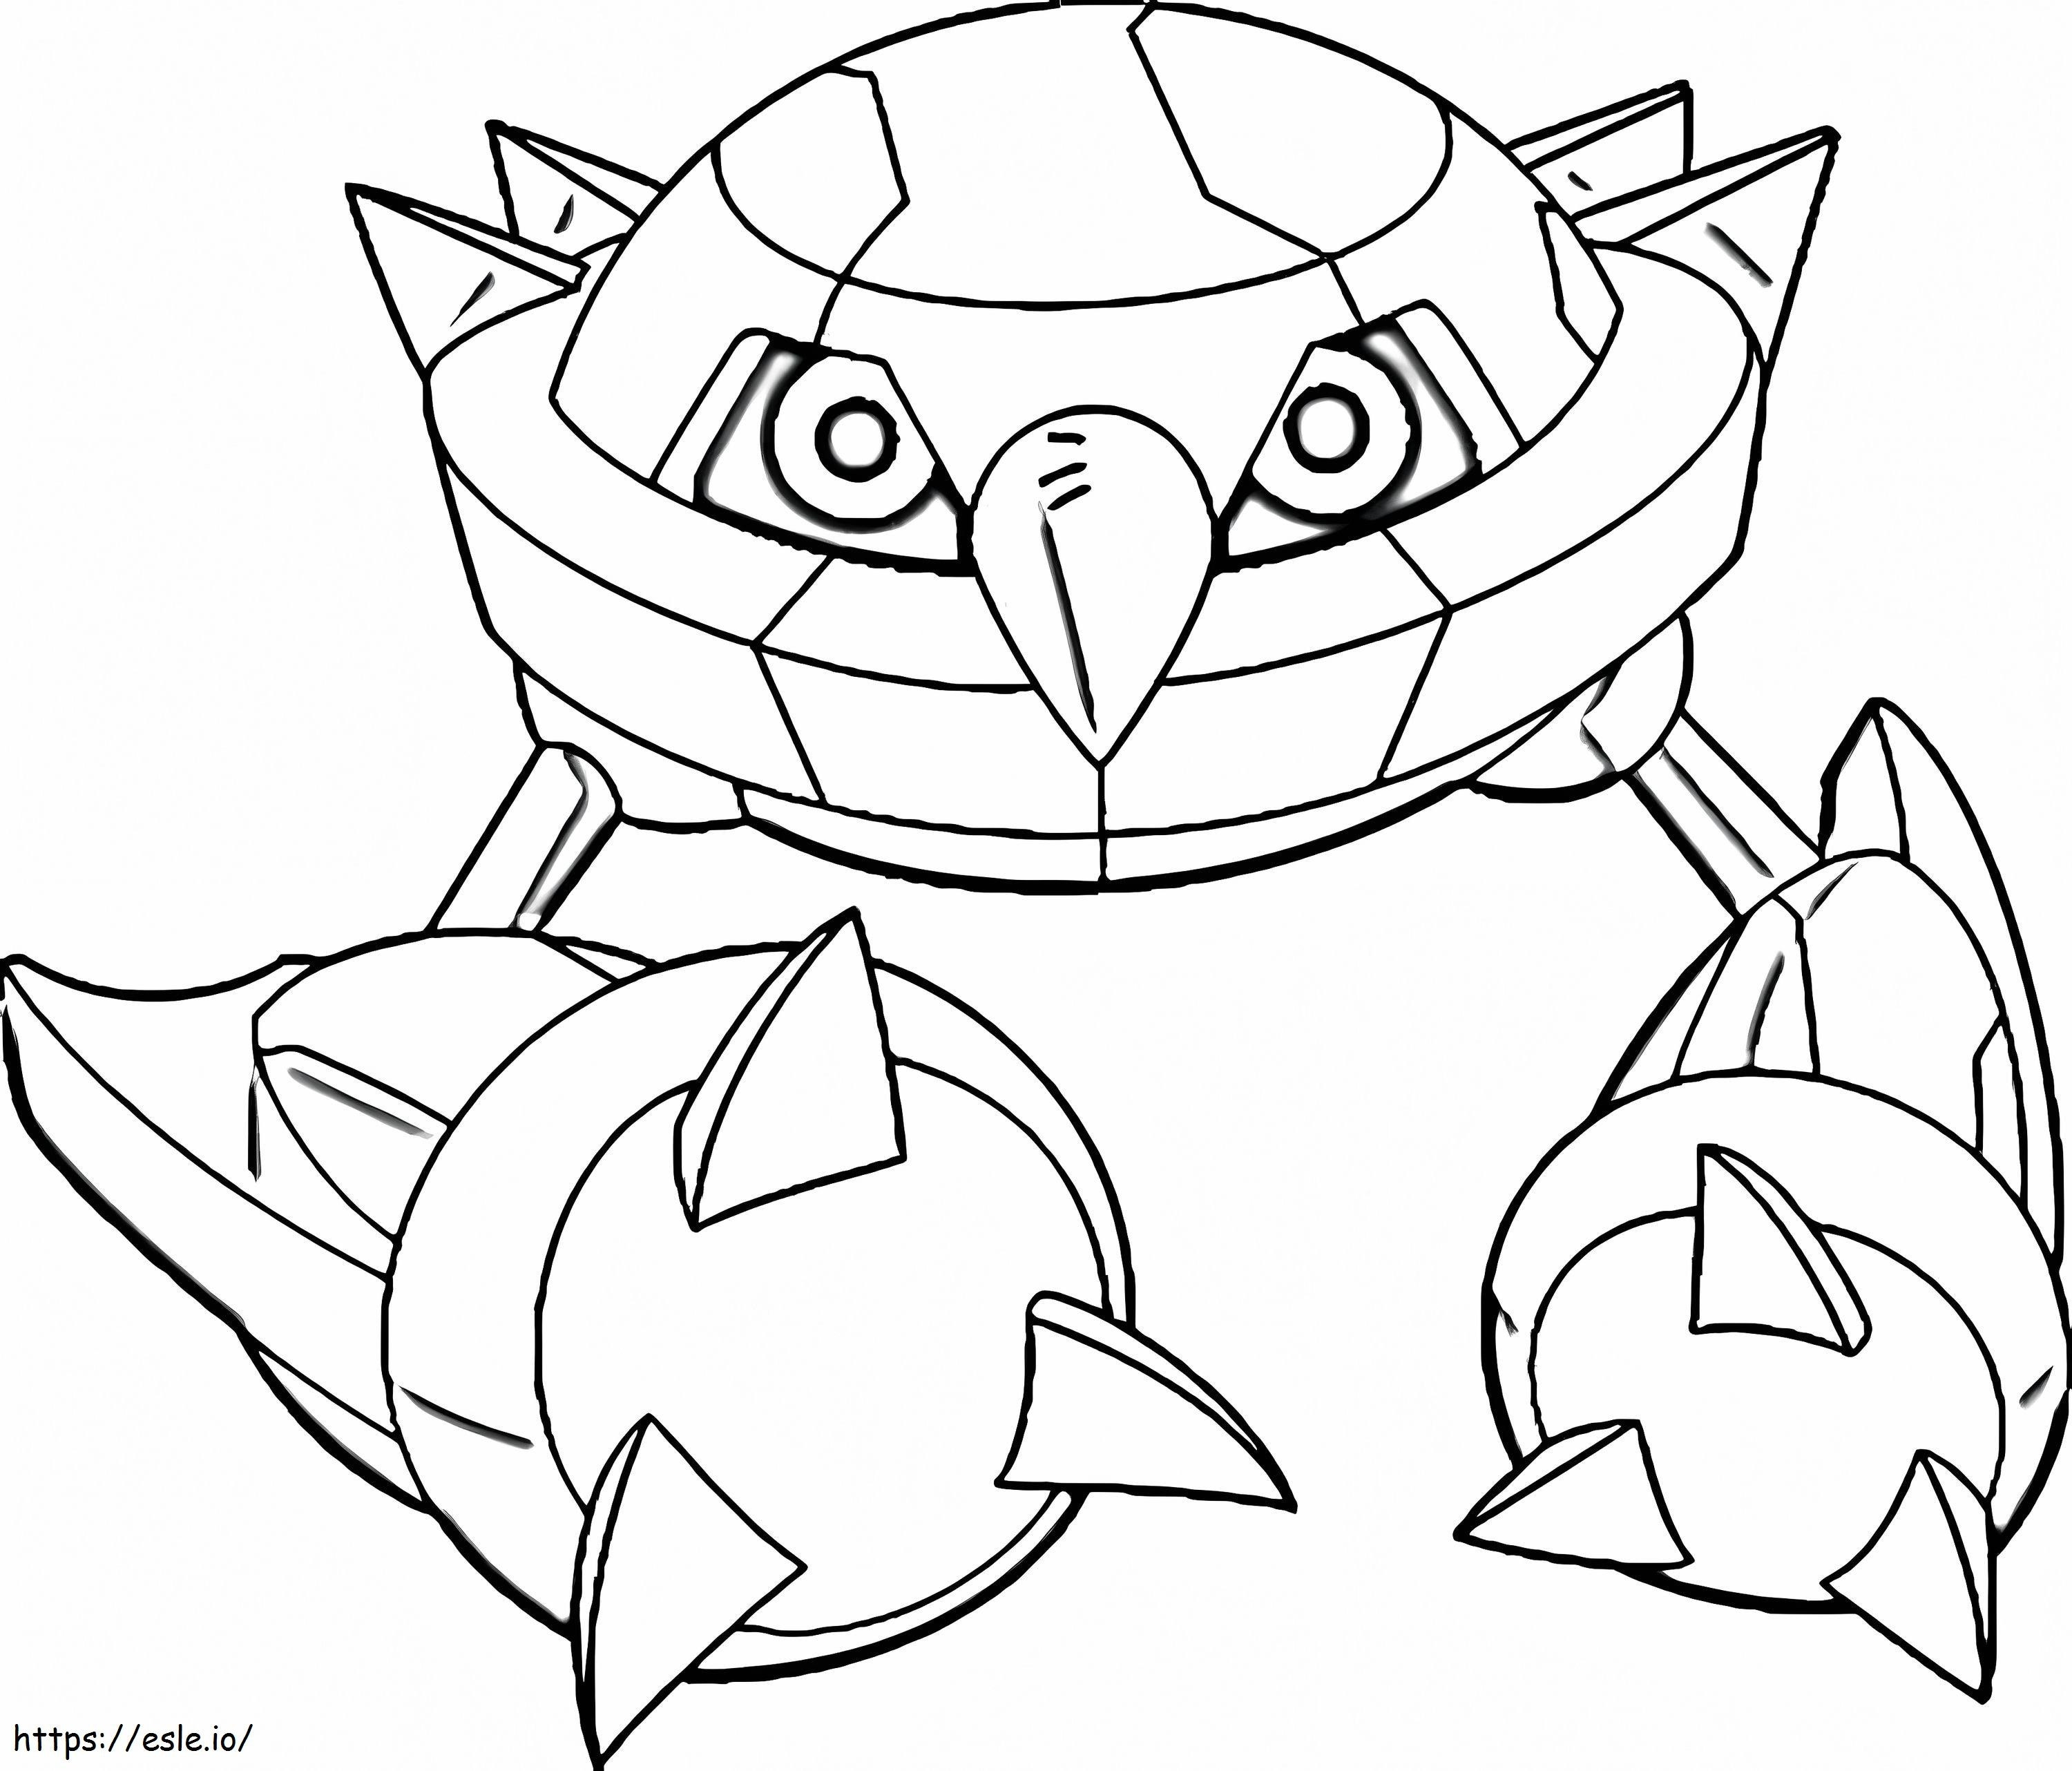 Methane coloring page